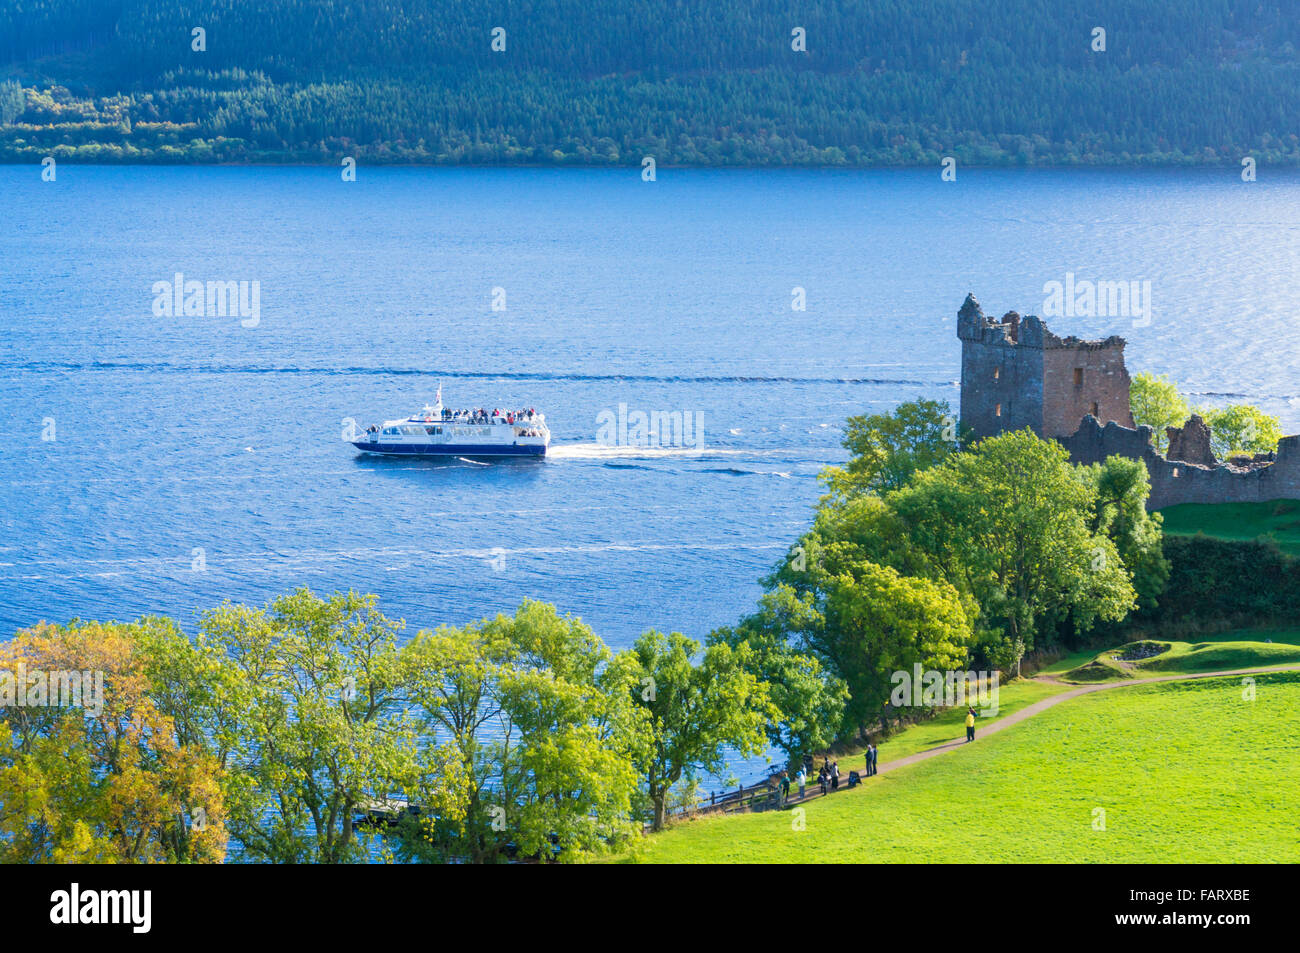 Loch Ness Cruise boat passing close to Urquhart Castle next to Loch Ness on Strone Point Highlands of Scotland UK GB EU Europe Stock Photo